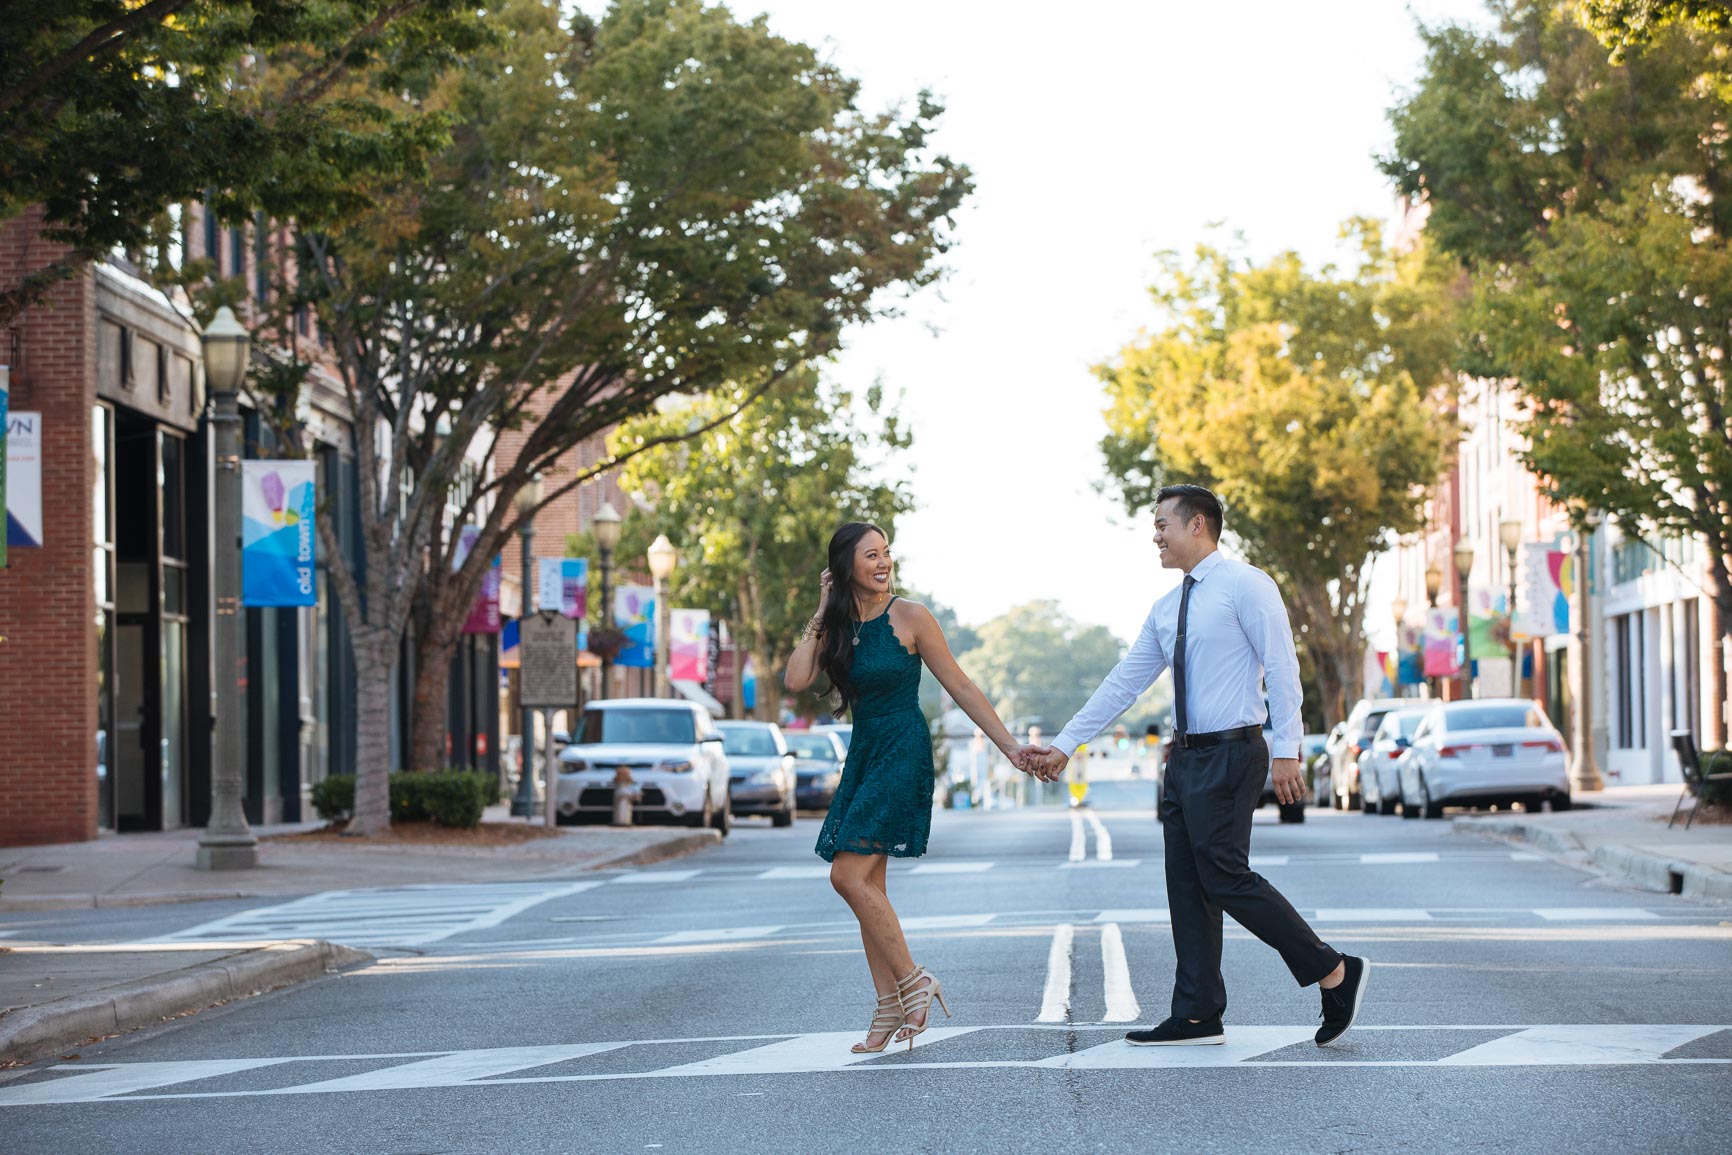 Pro wedding photographer Nhieu Tang provides tips on what to wear for engagement photos for newly engaged couples, modern and chic outfits for newly engaged couple in rock hill sc | nhieutang.com